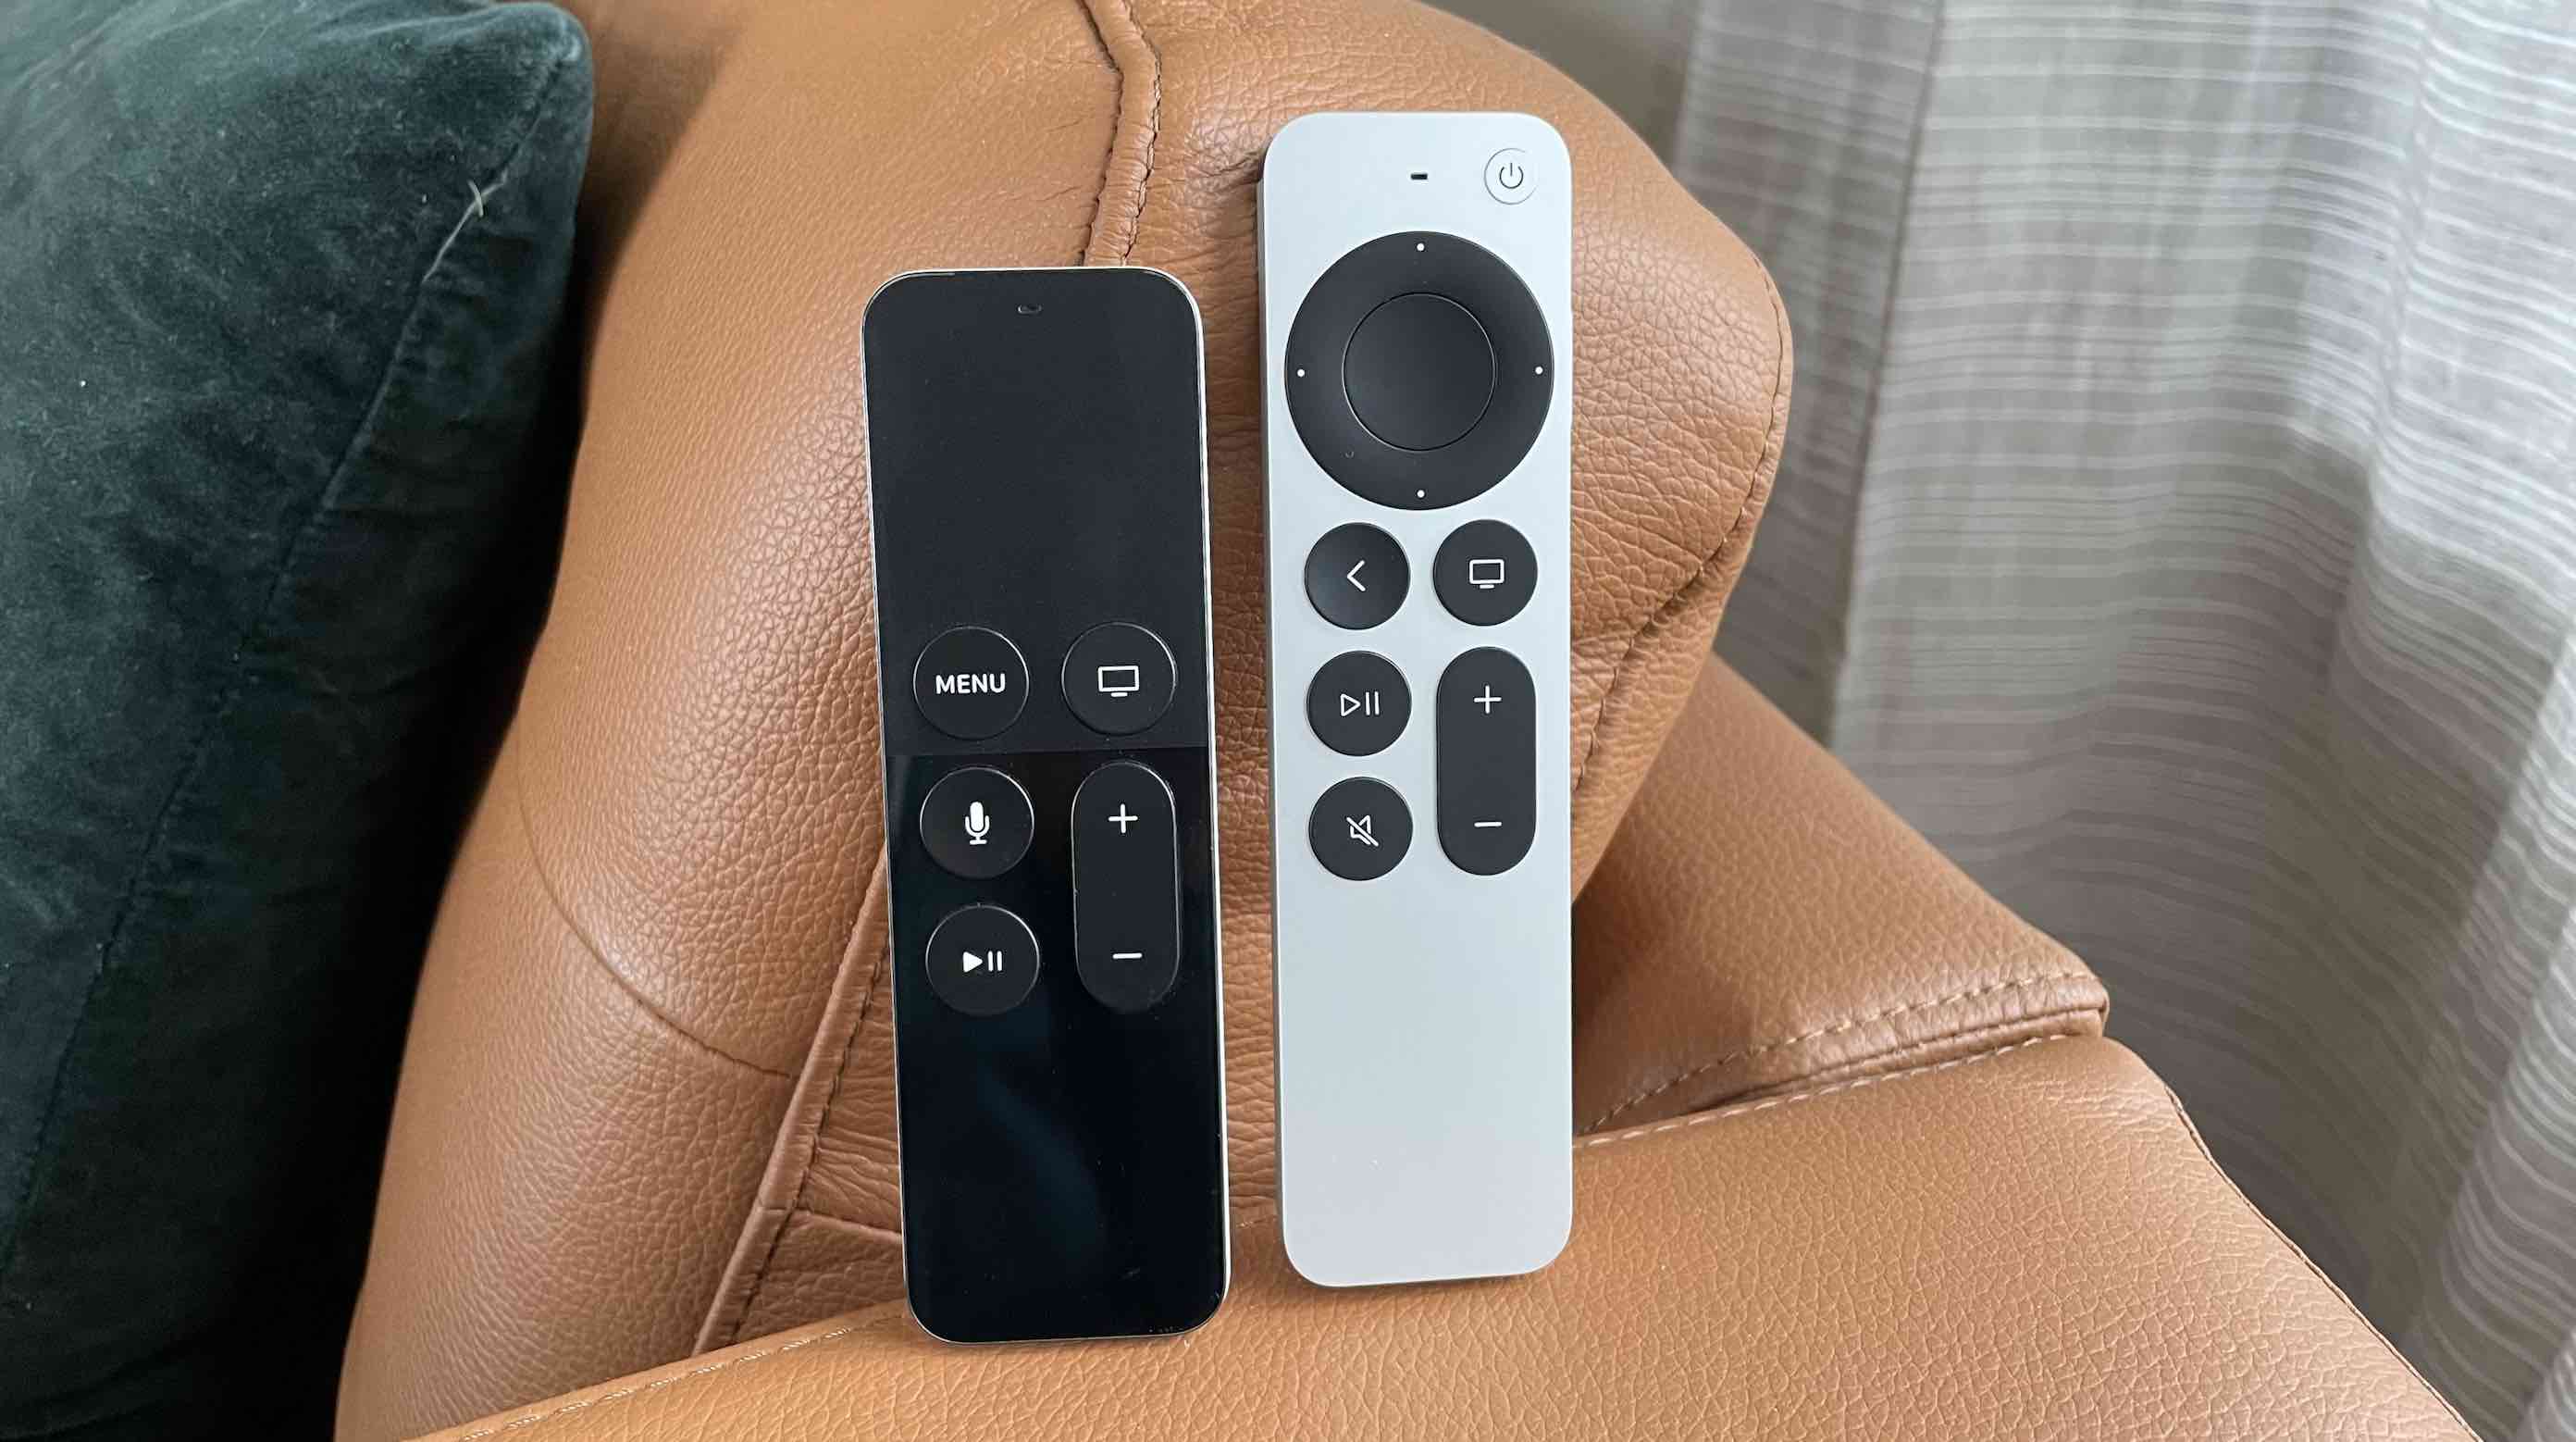 brillante Incompatible Duque Is the new Siri Remote is an improvement? – Poll - 9to5Mac